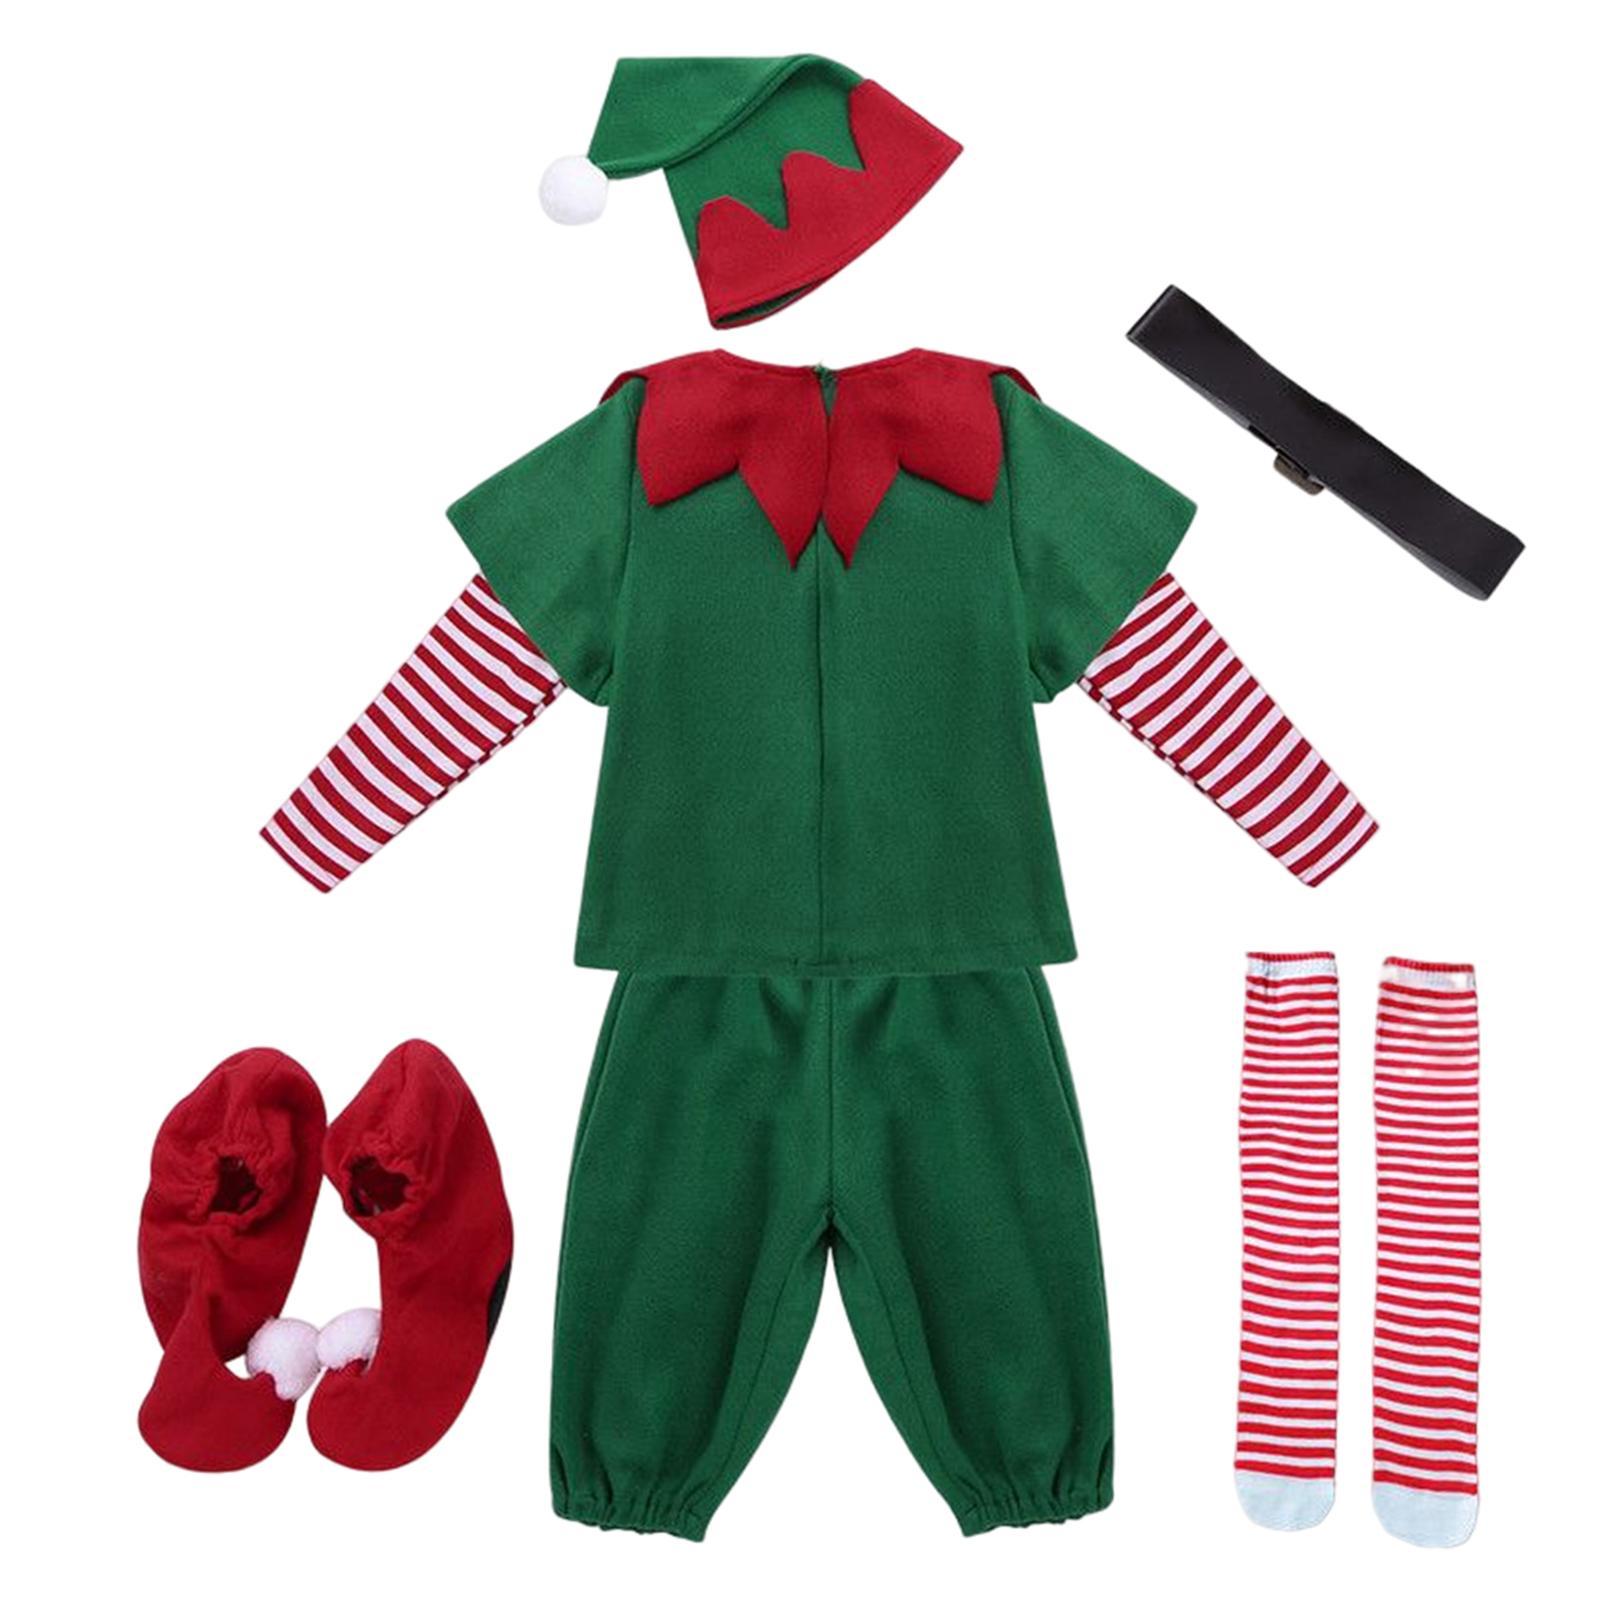 Elf Christmas Costume Clothes Outfit for Stage Performance Role Play Birthday Festival